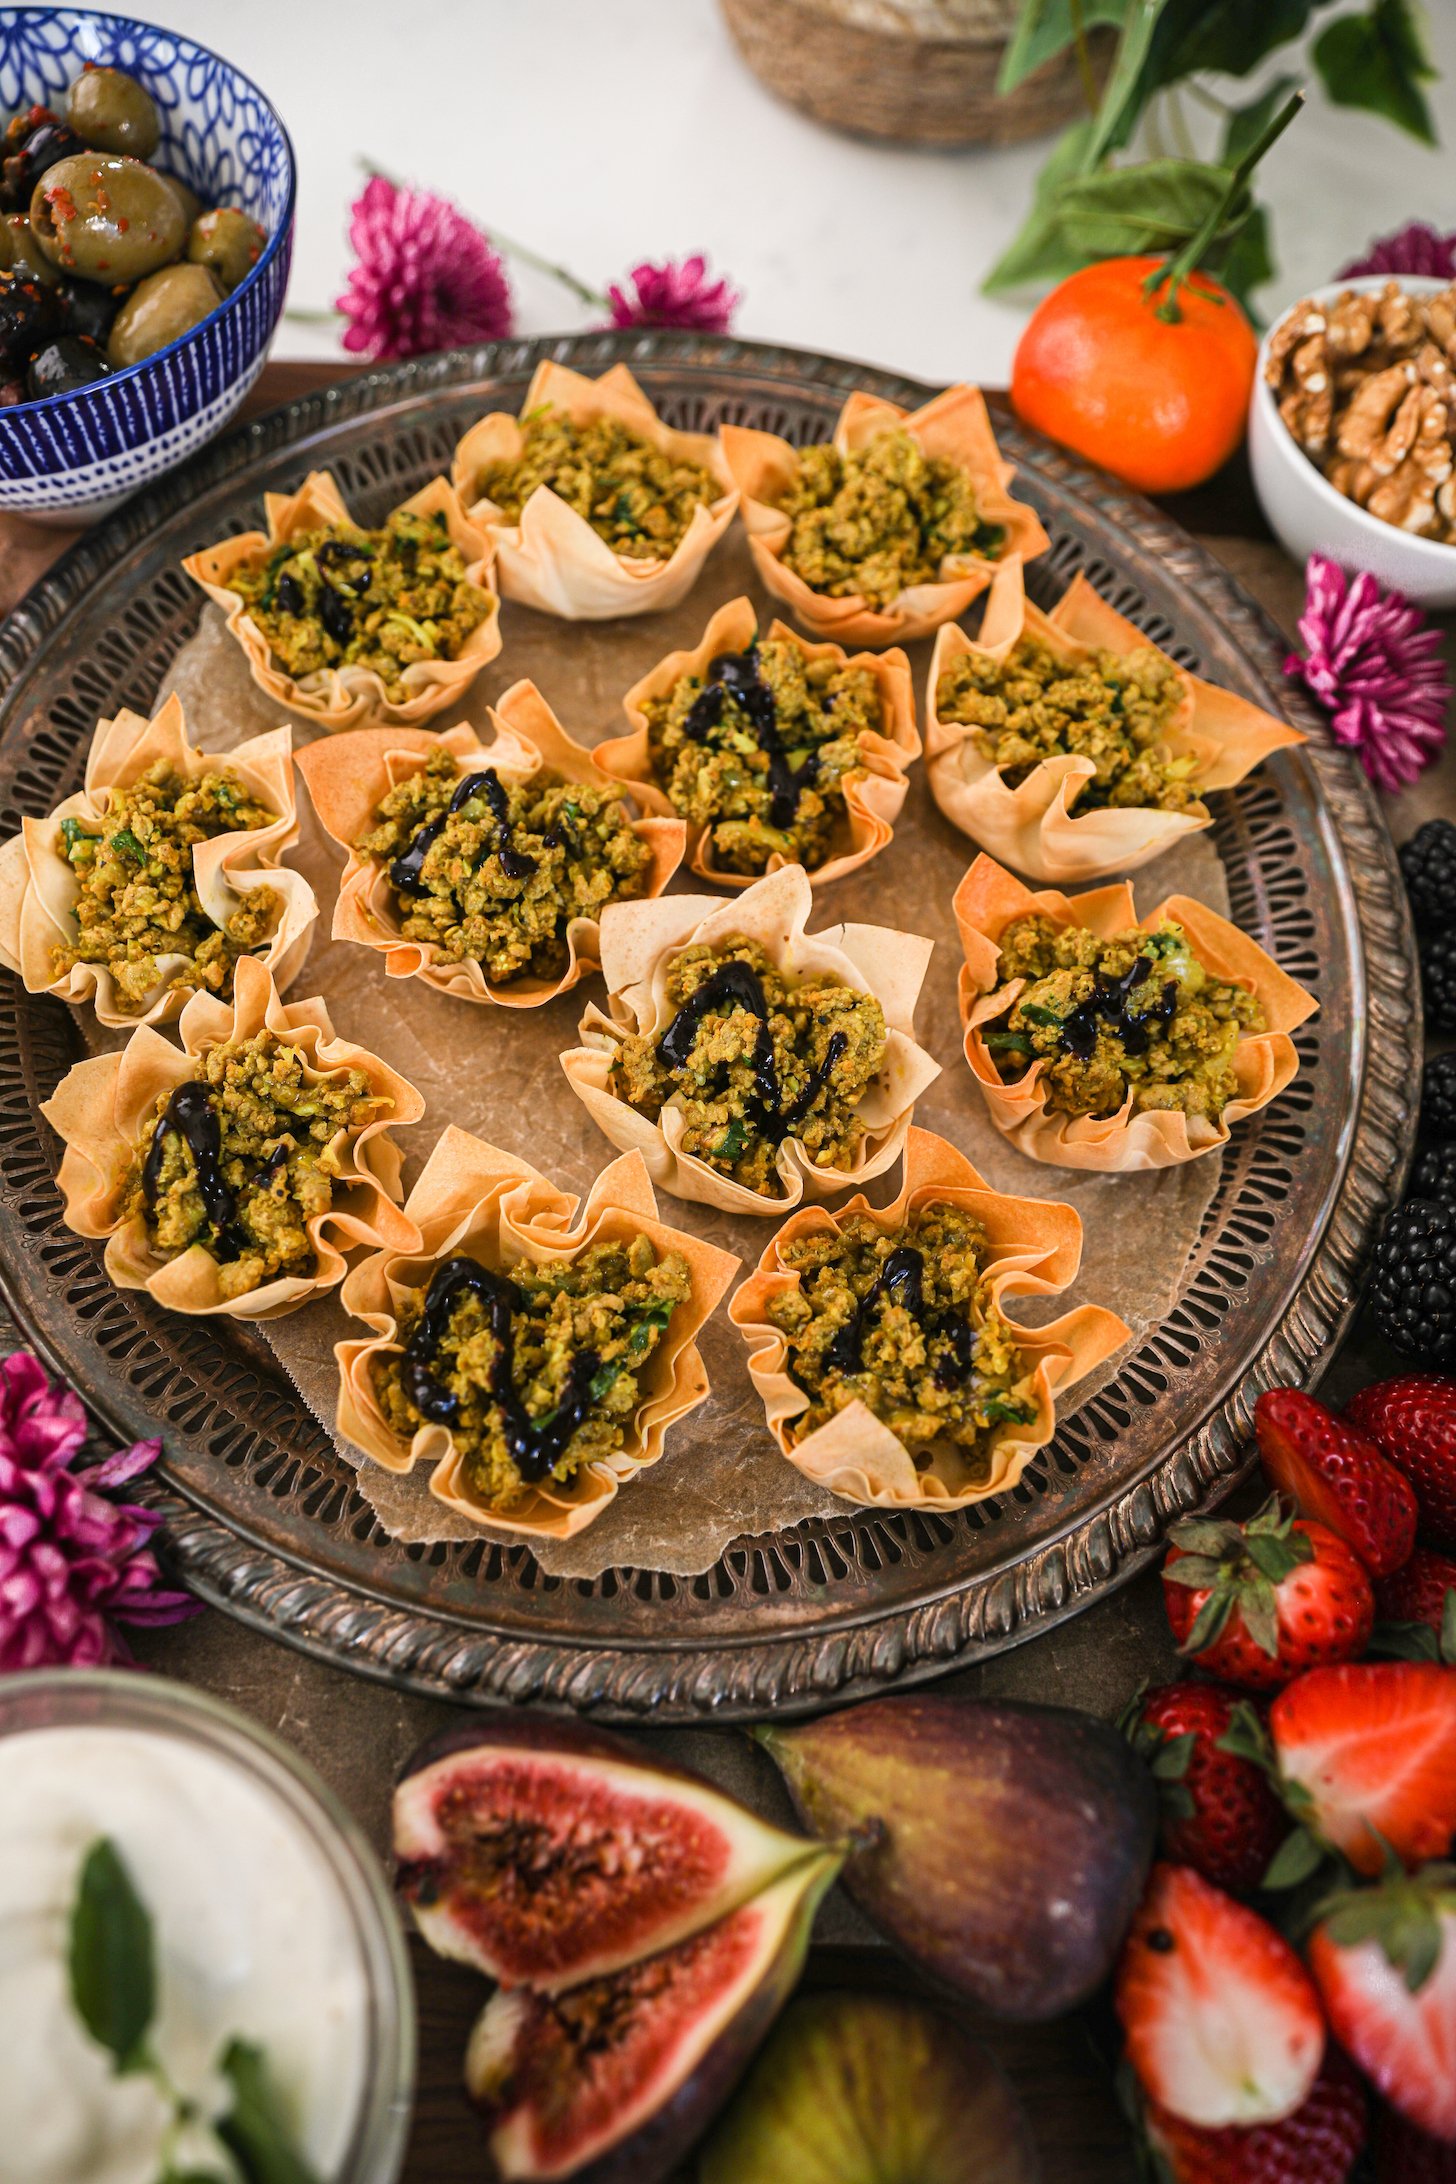 A tray of baked pastry shells filled with minced chicken and topped with a drizzle of a dark dressing surrounded by fruits and nuts.